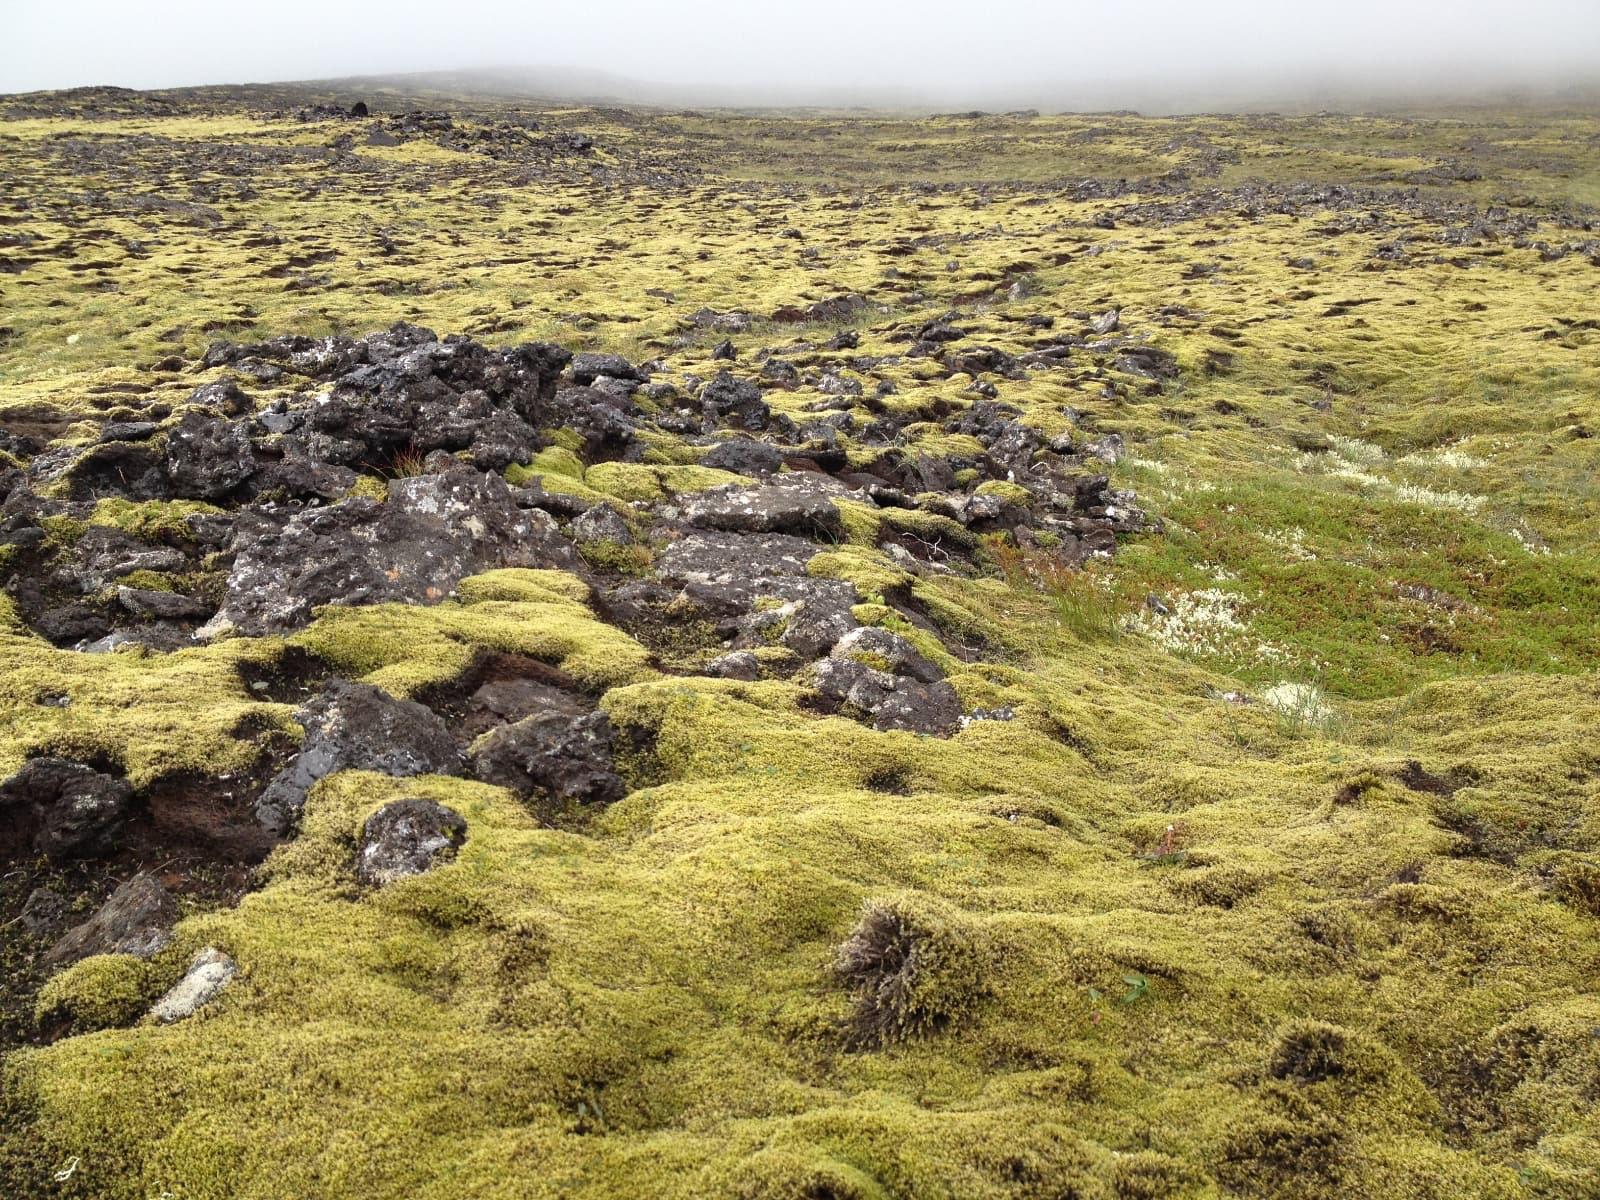 A combination of moss and rugged rock landscape